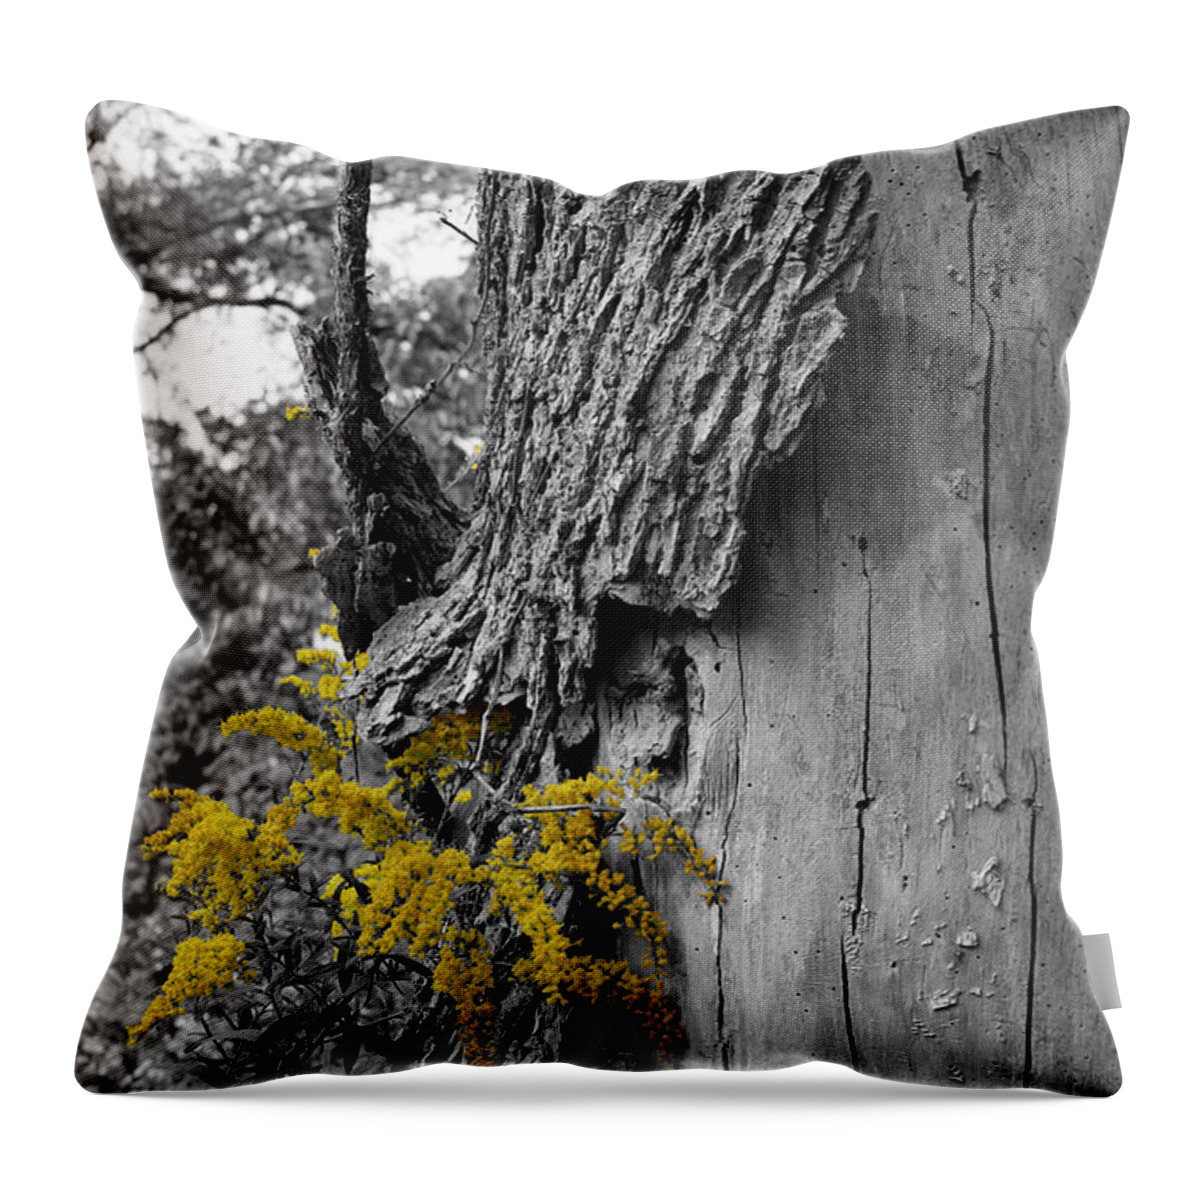 Bark Throw Pillow featuring the photograph Yellow Tufts by Dylan Punke